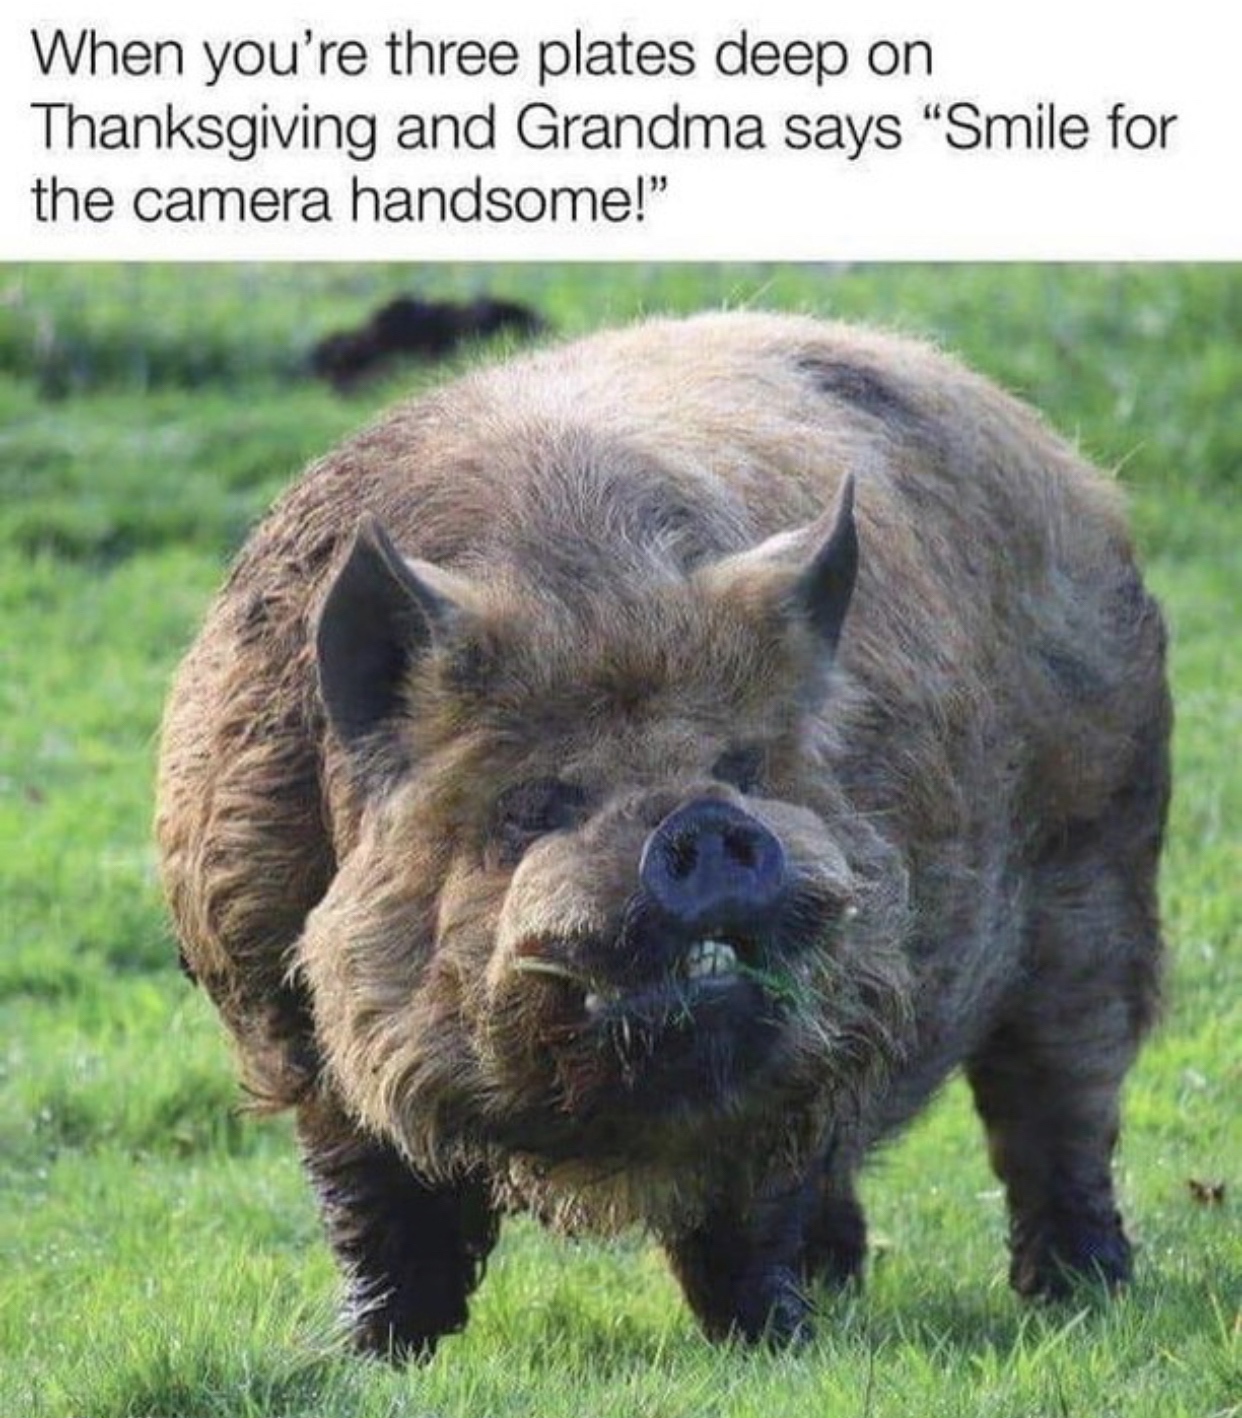 american kunekune pig - When you're three plates deep on Thanksgiving and Grandma says "Smile for the camera handsome!"